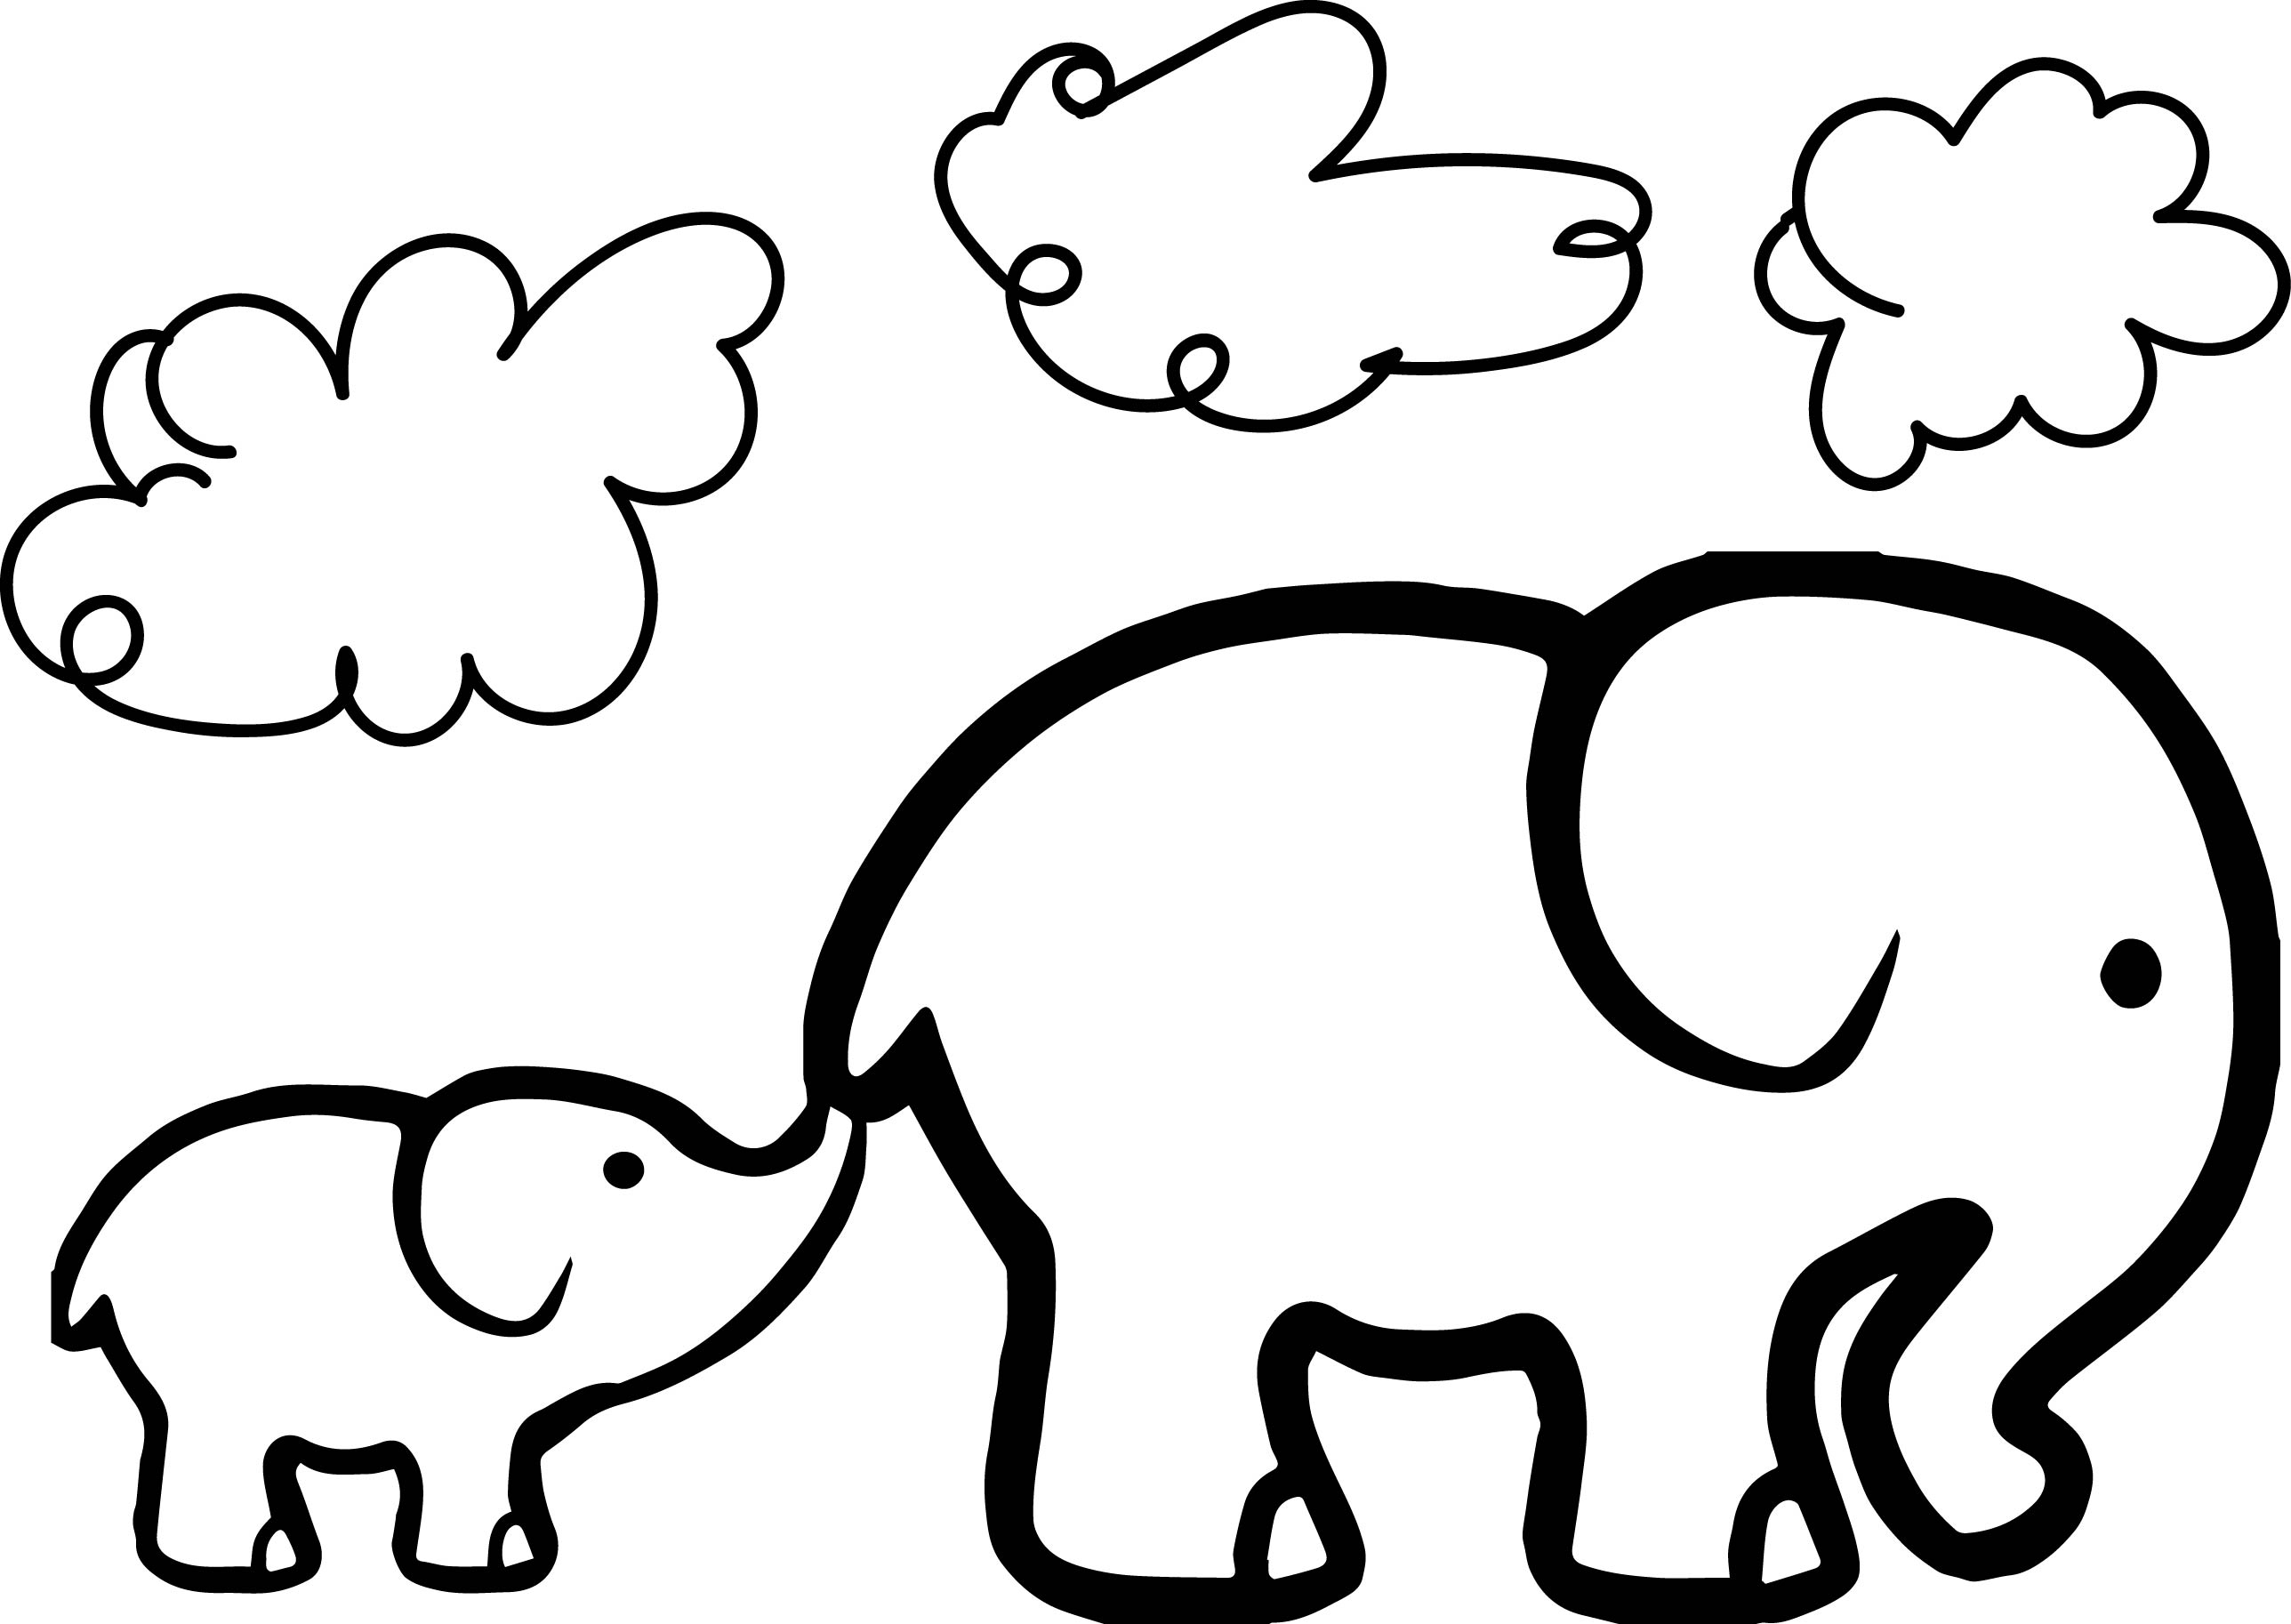 Elephant Coloring Pages For Preschool Elephant Coloring Pages Free Download Best Elephant Coloring Pages